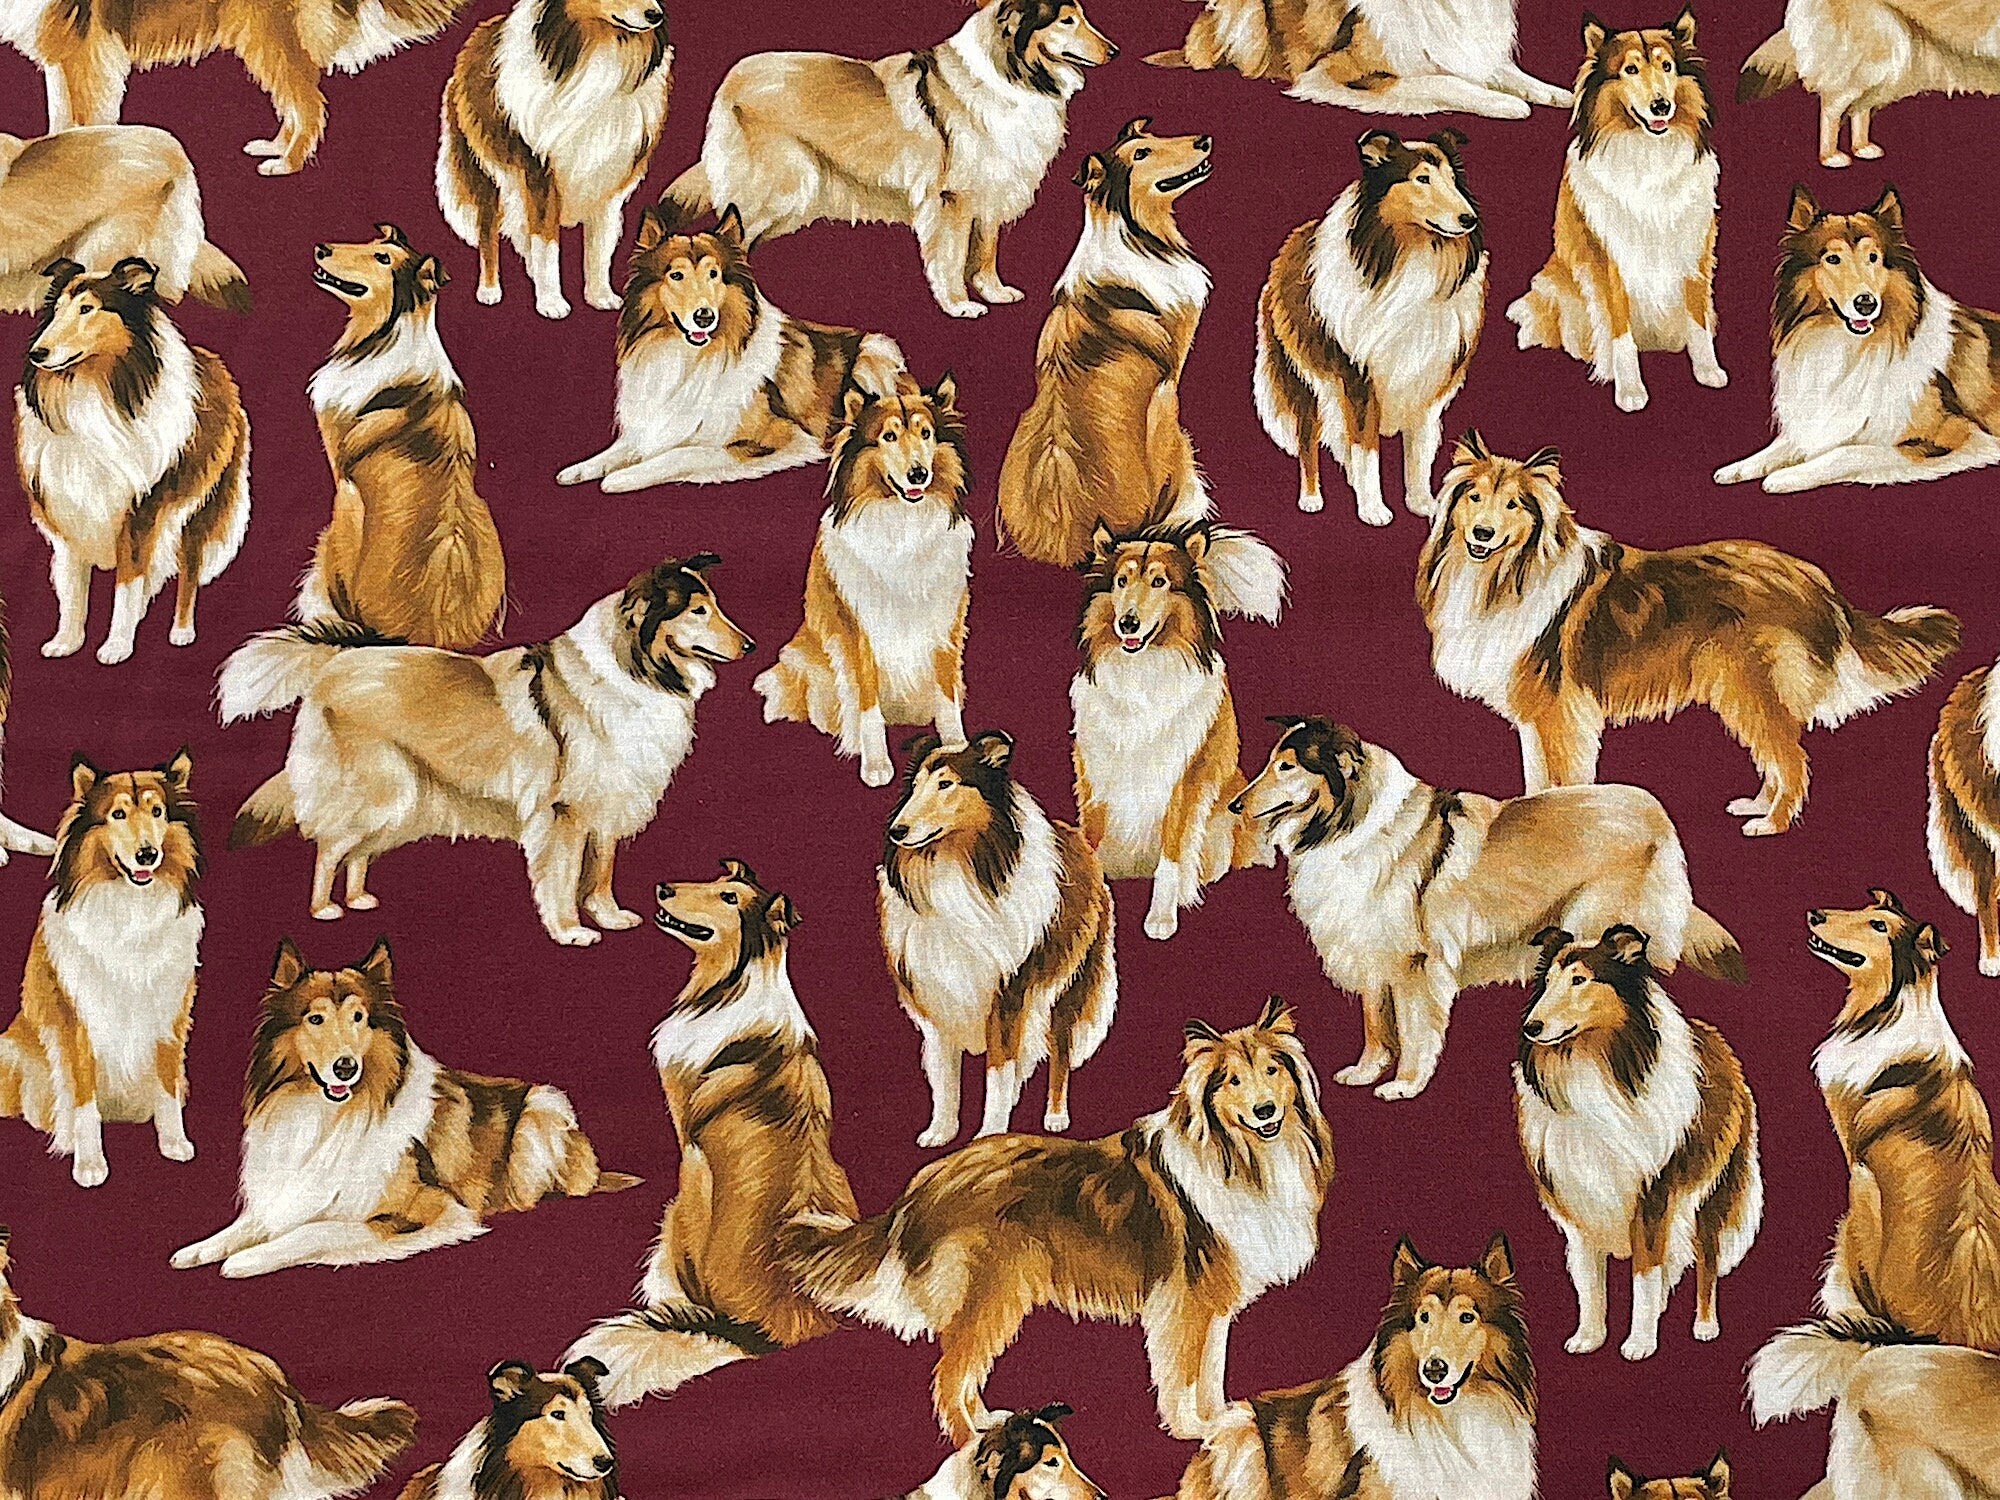 This burgundy fabric is covered with collies. Some of the collies are standing and others are laying down.